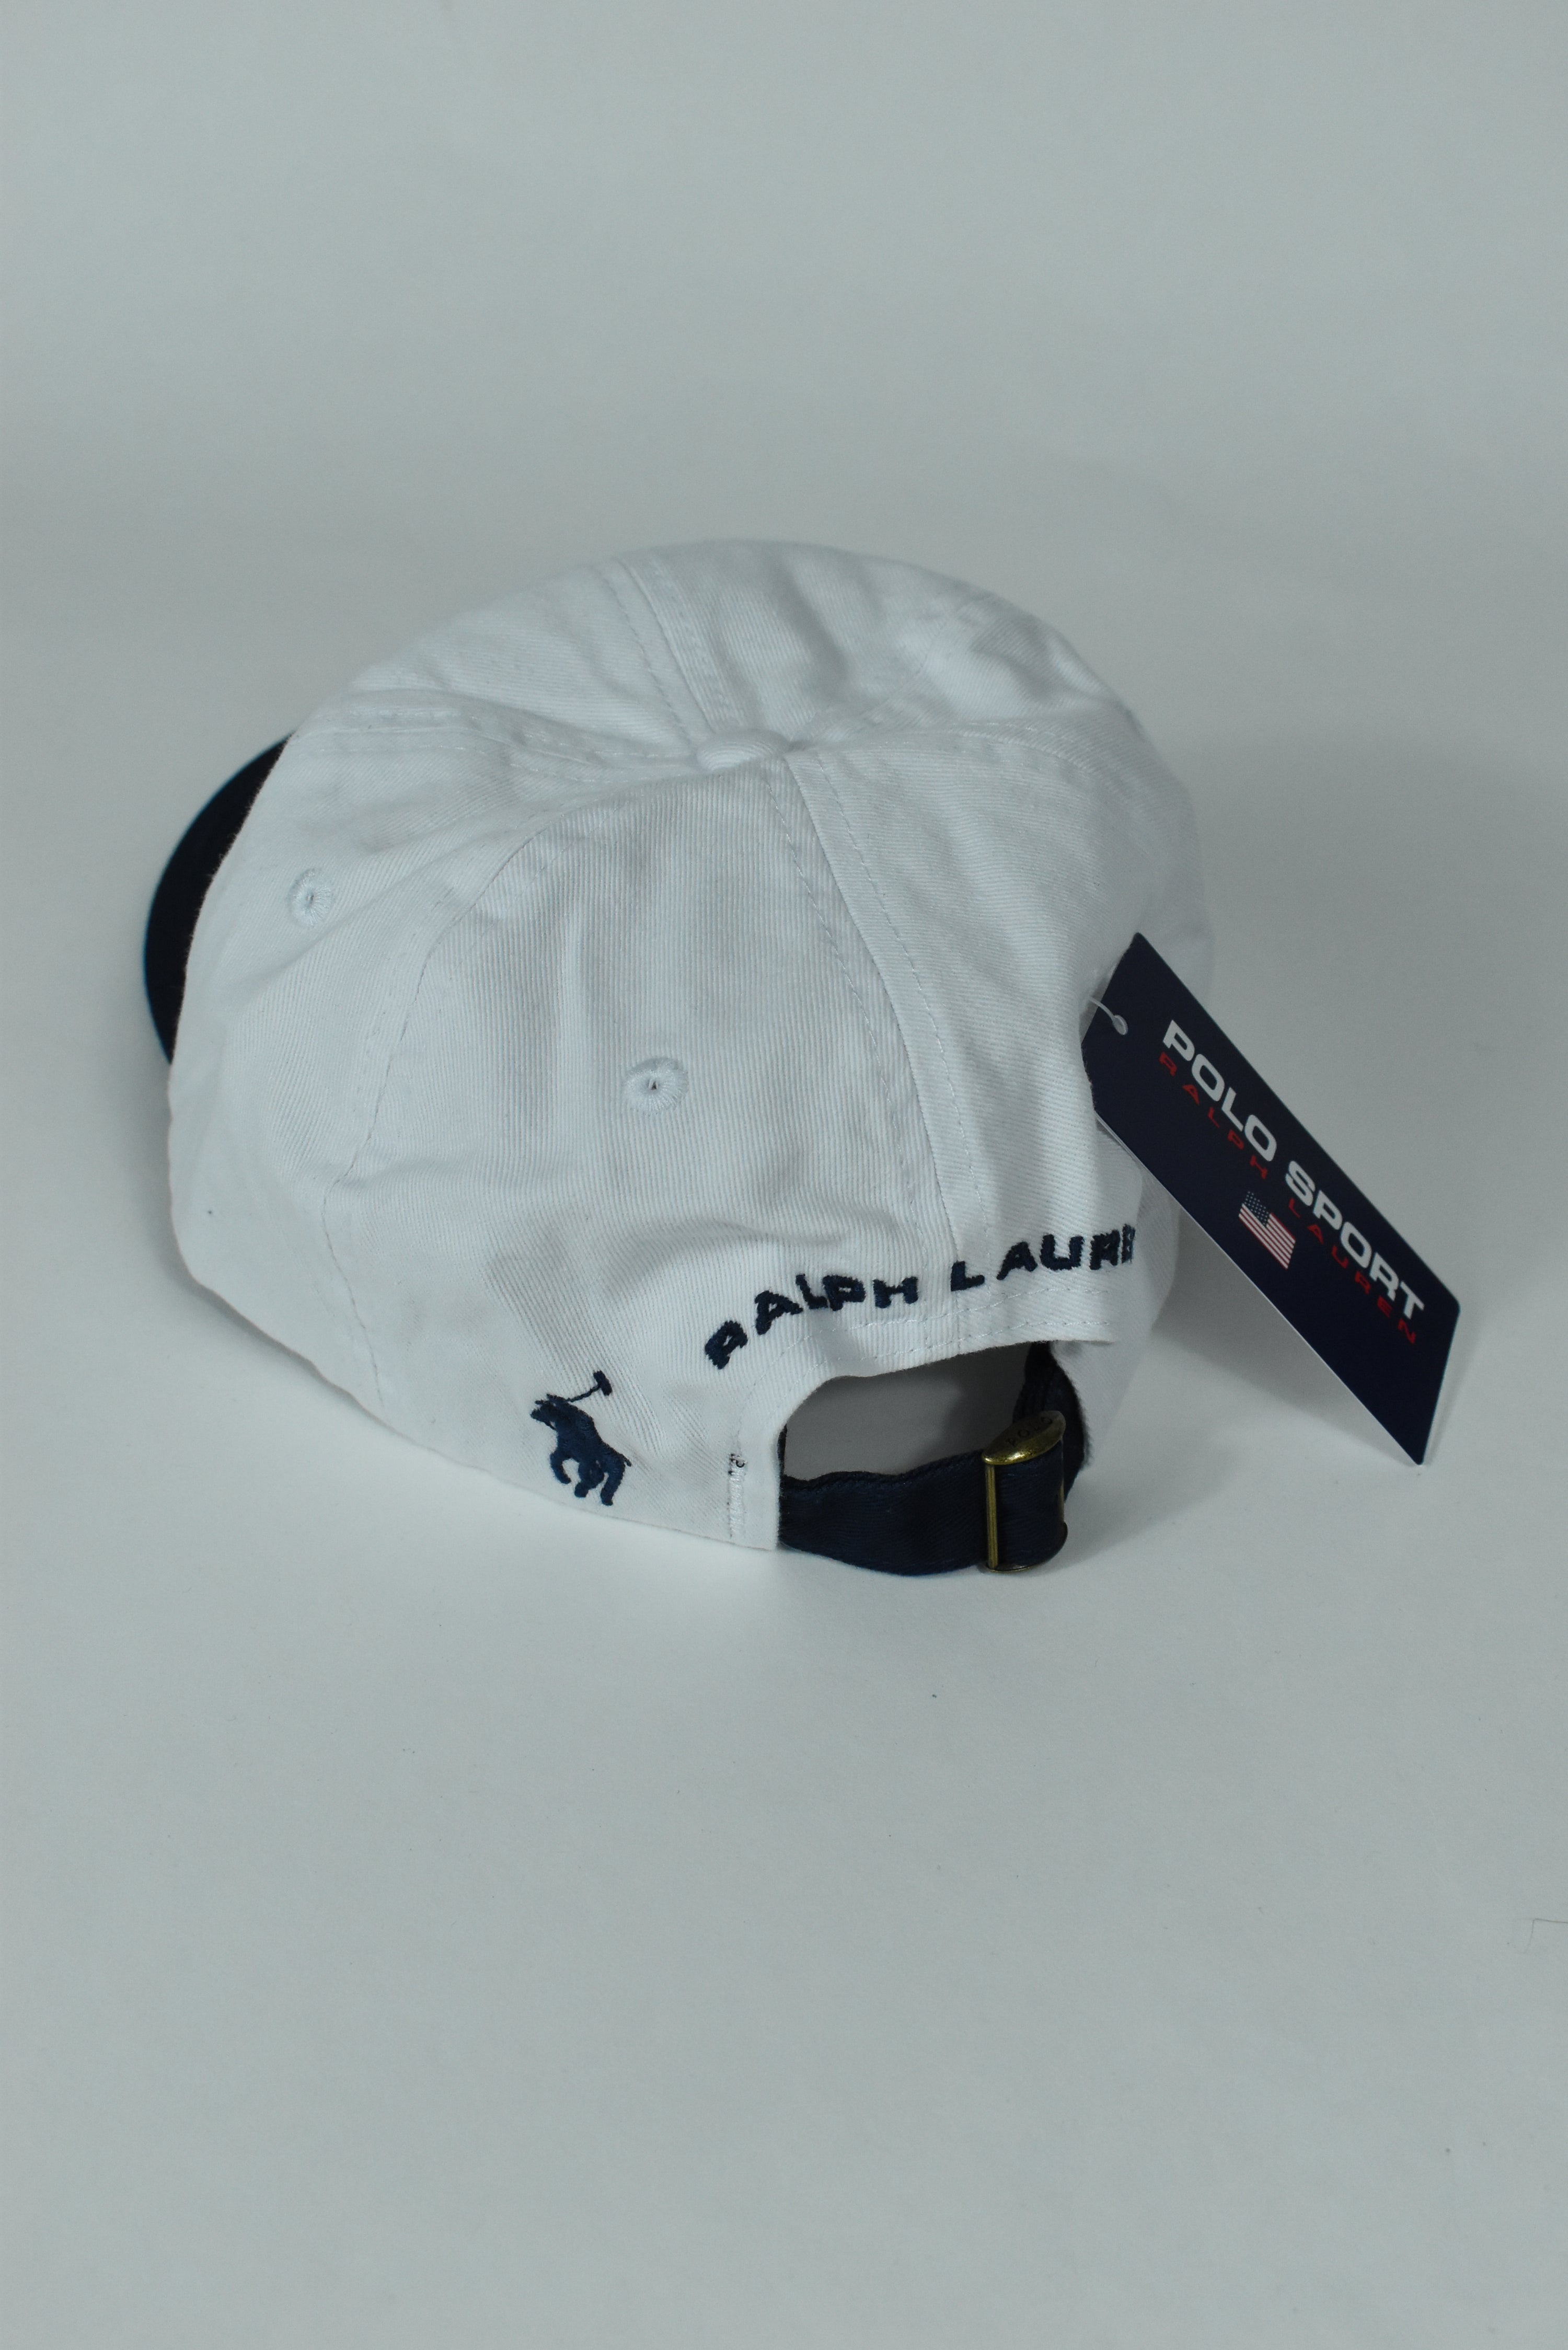 New White/Navy RL Polo Sport Embroidery Cap